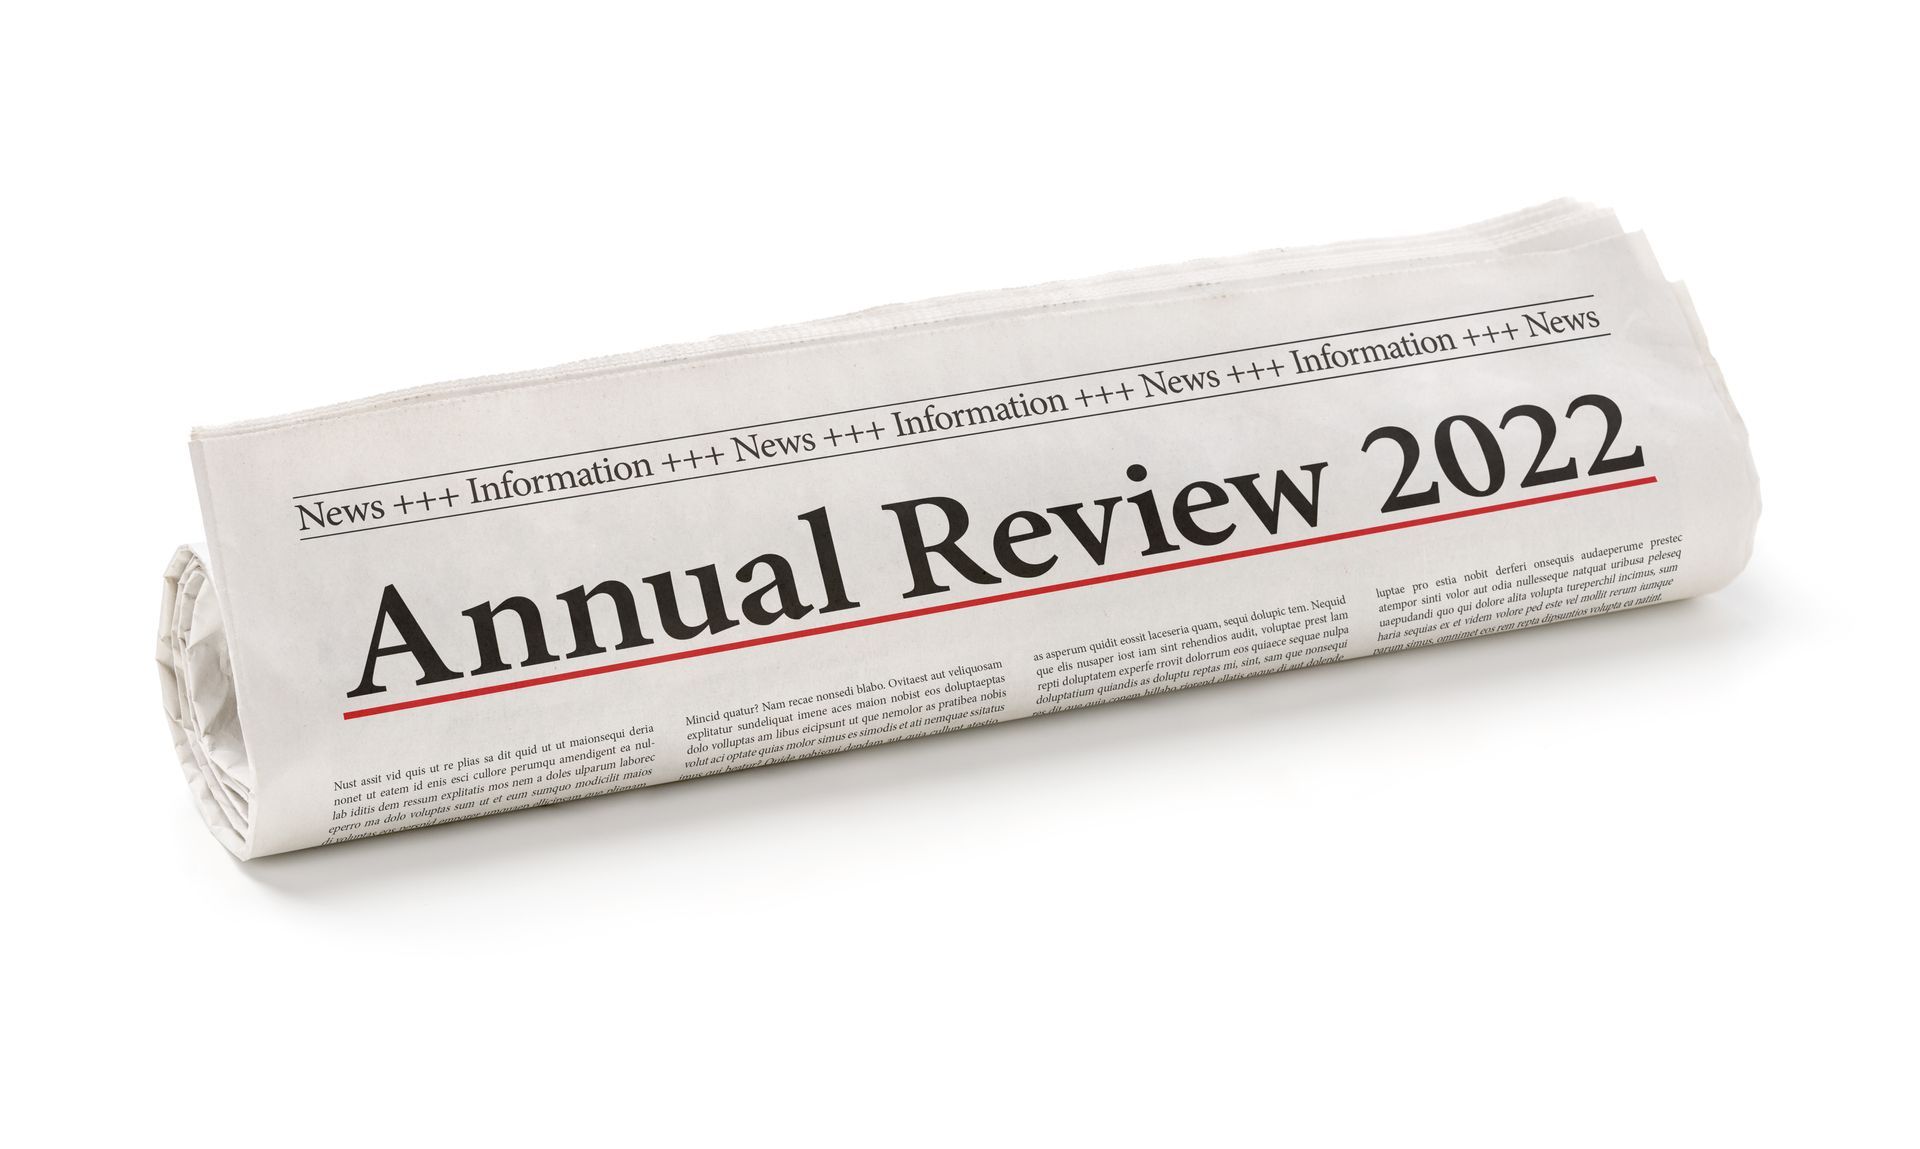 A newspaper sting Annual Review